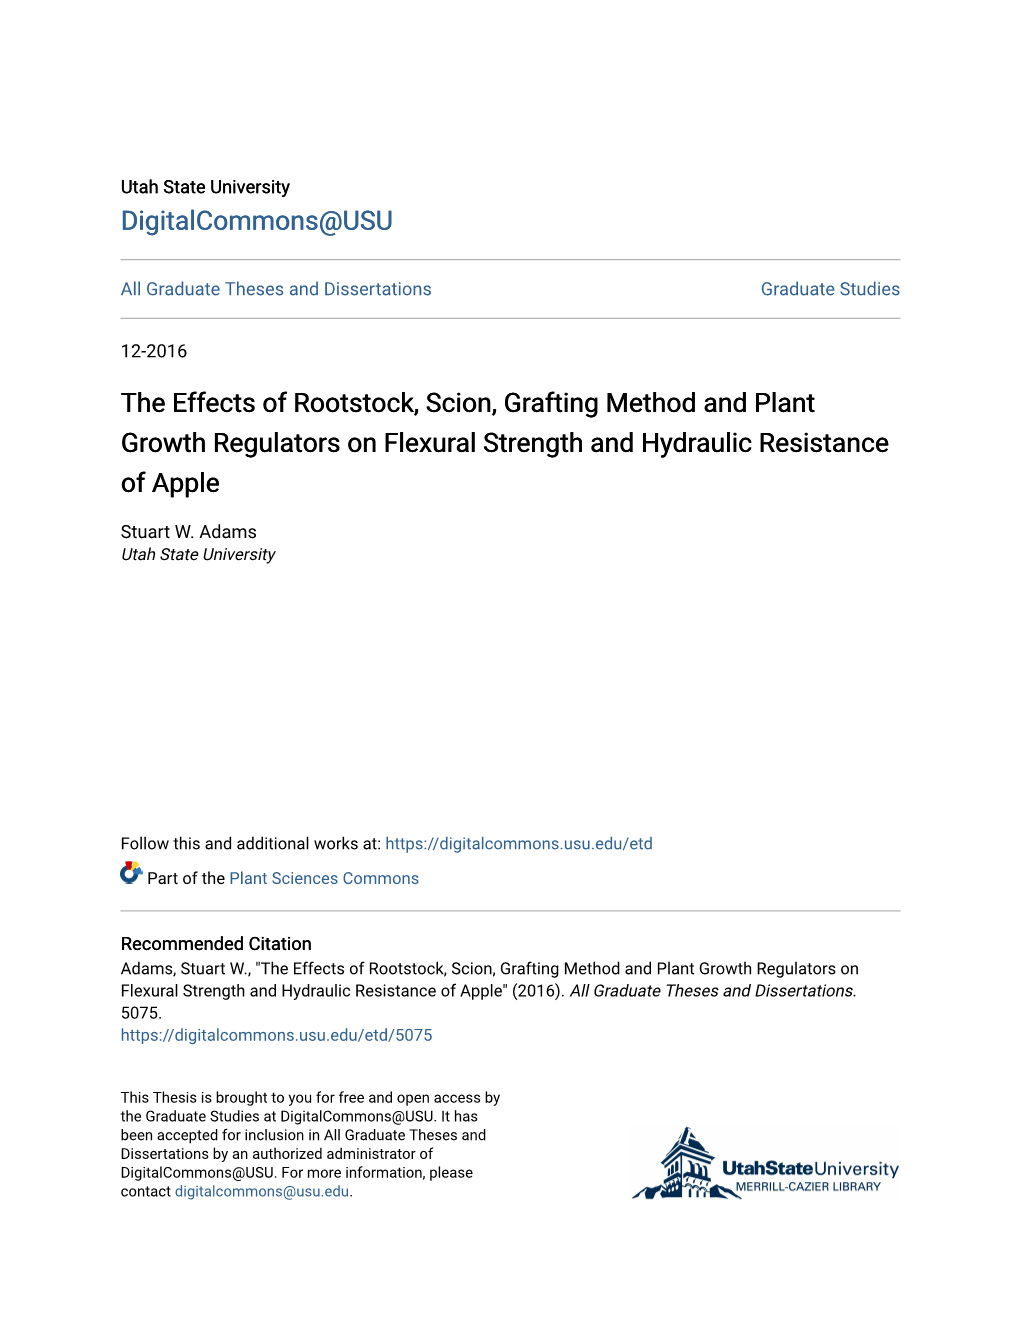 The Effects of Rootstock, Scion, Grafting Method and Plant Growth Regulators on Flexural Strength and Hydraulic Resistance of Apple